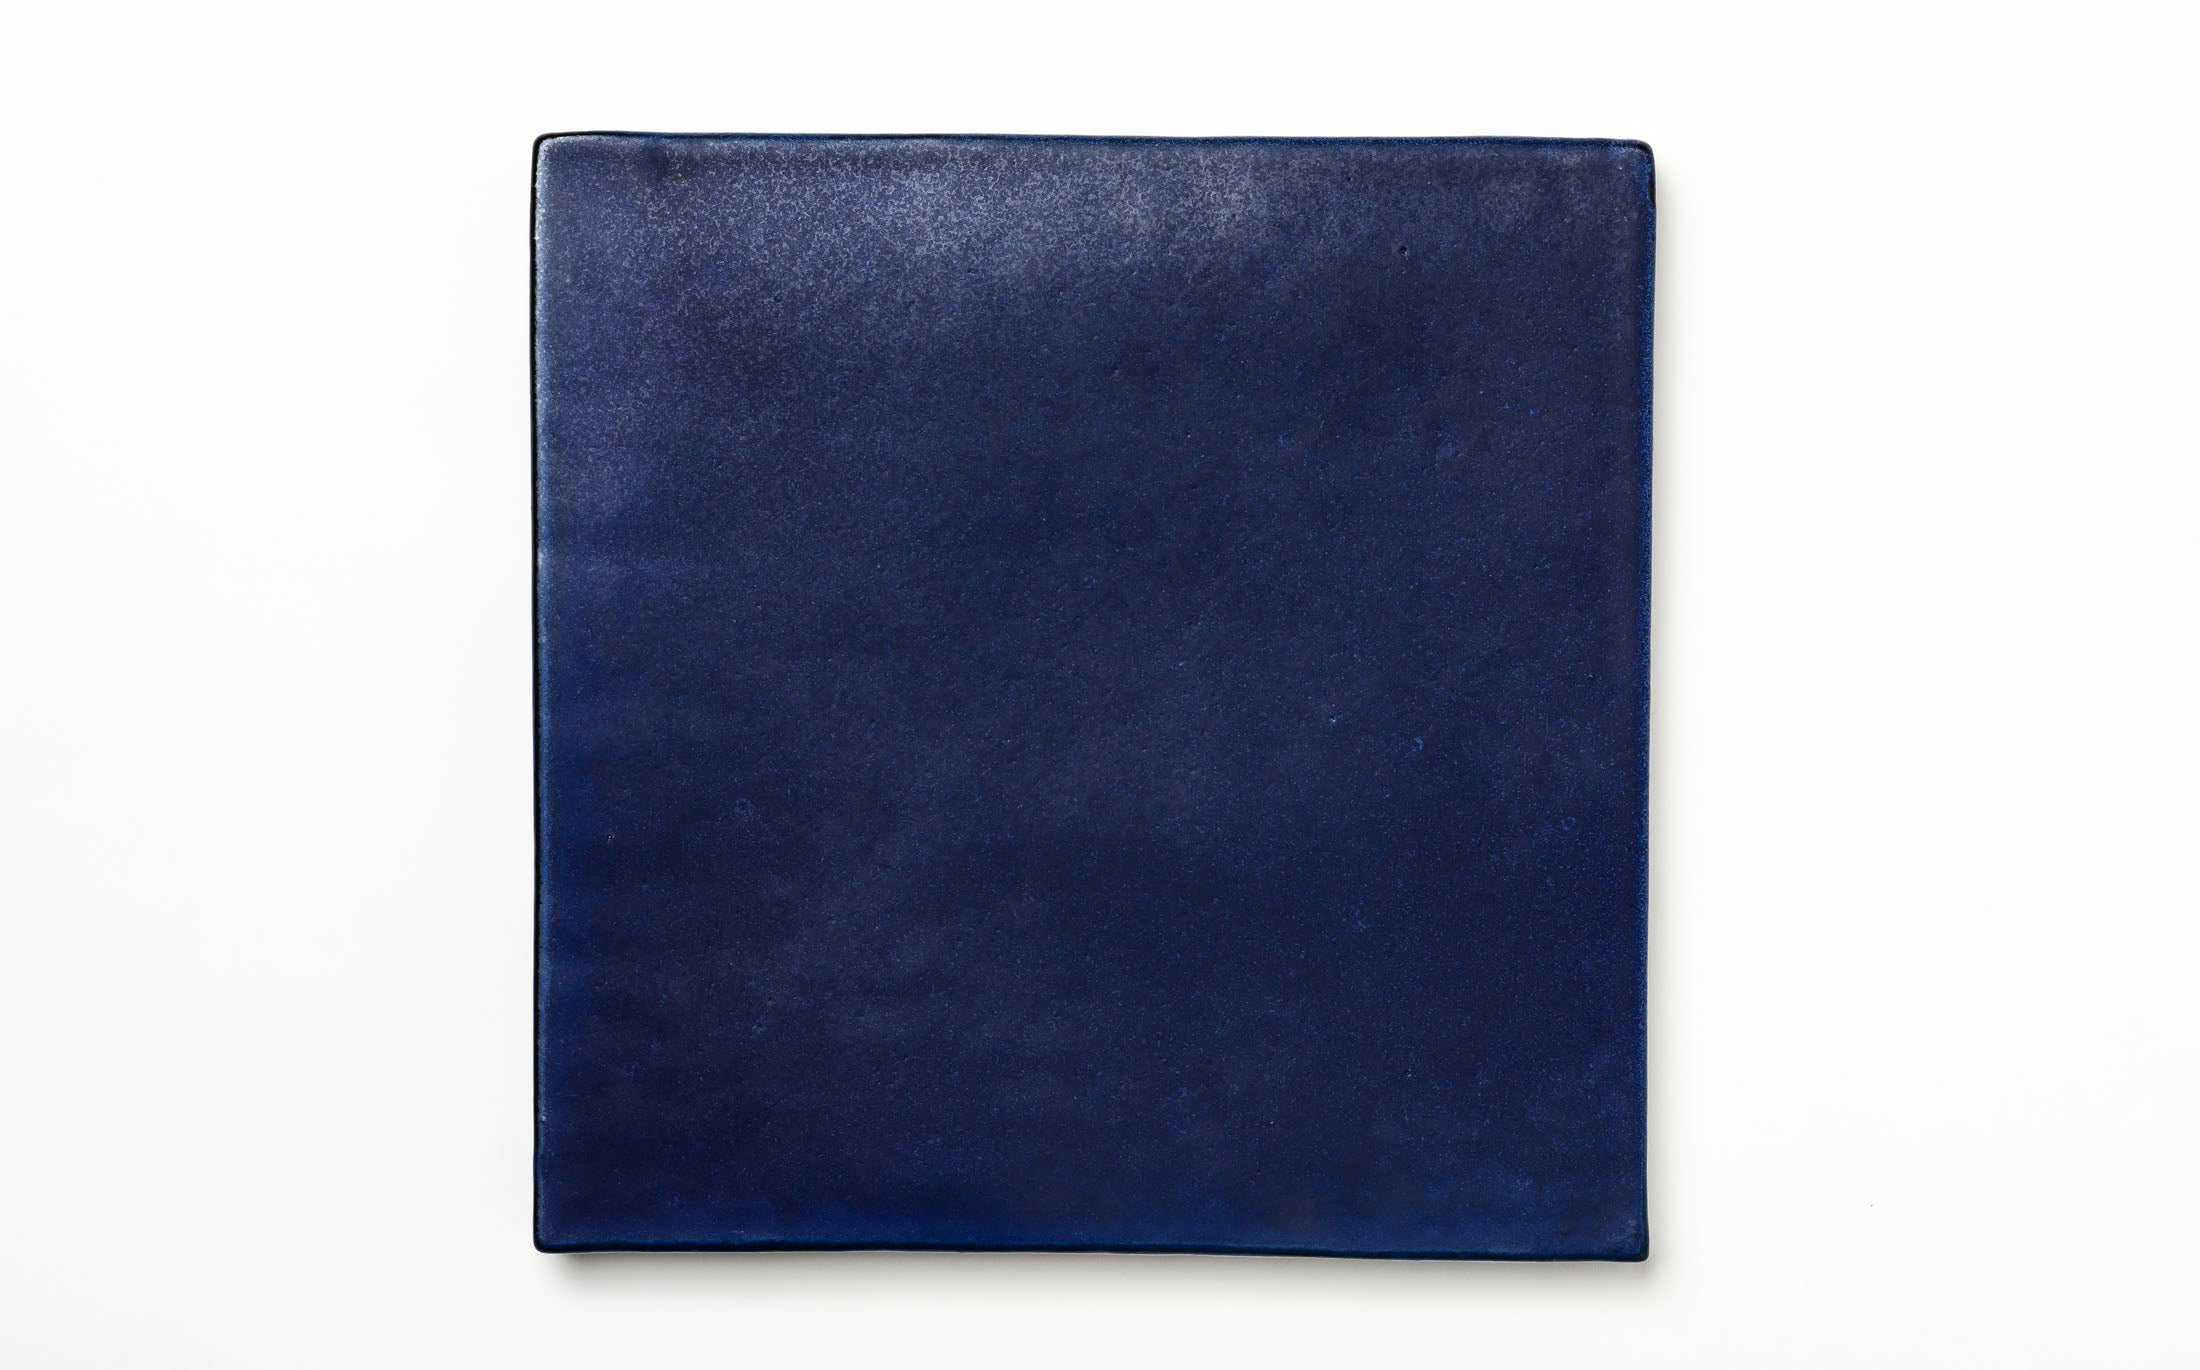 Kasama - Ceramic Blue - Square Plate with Legs